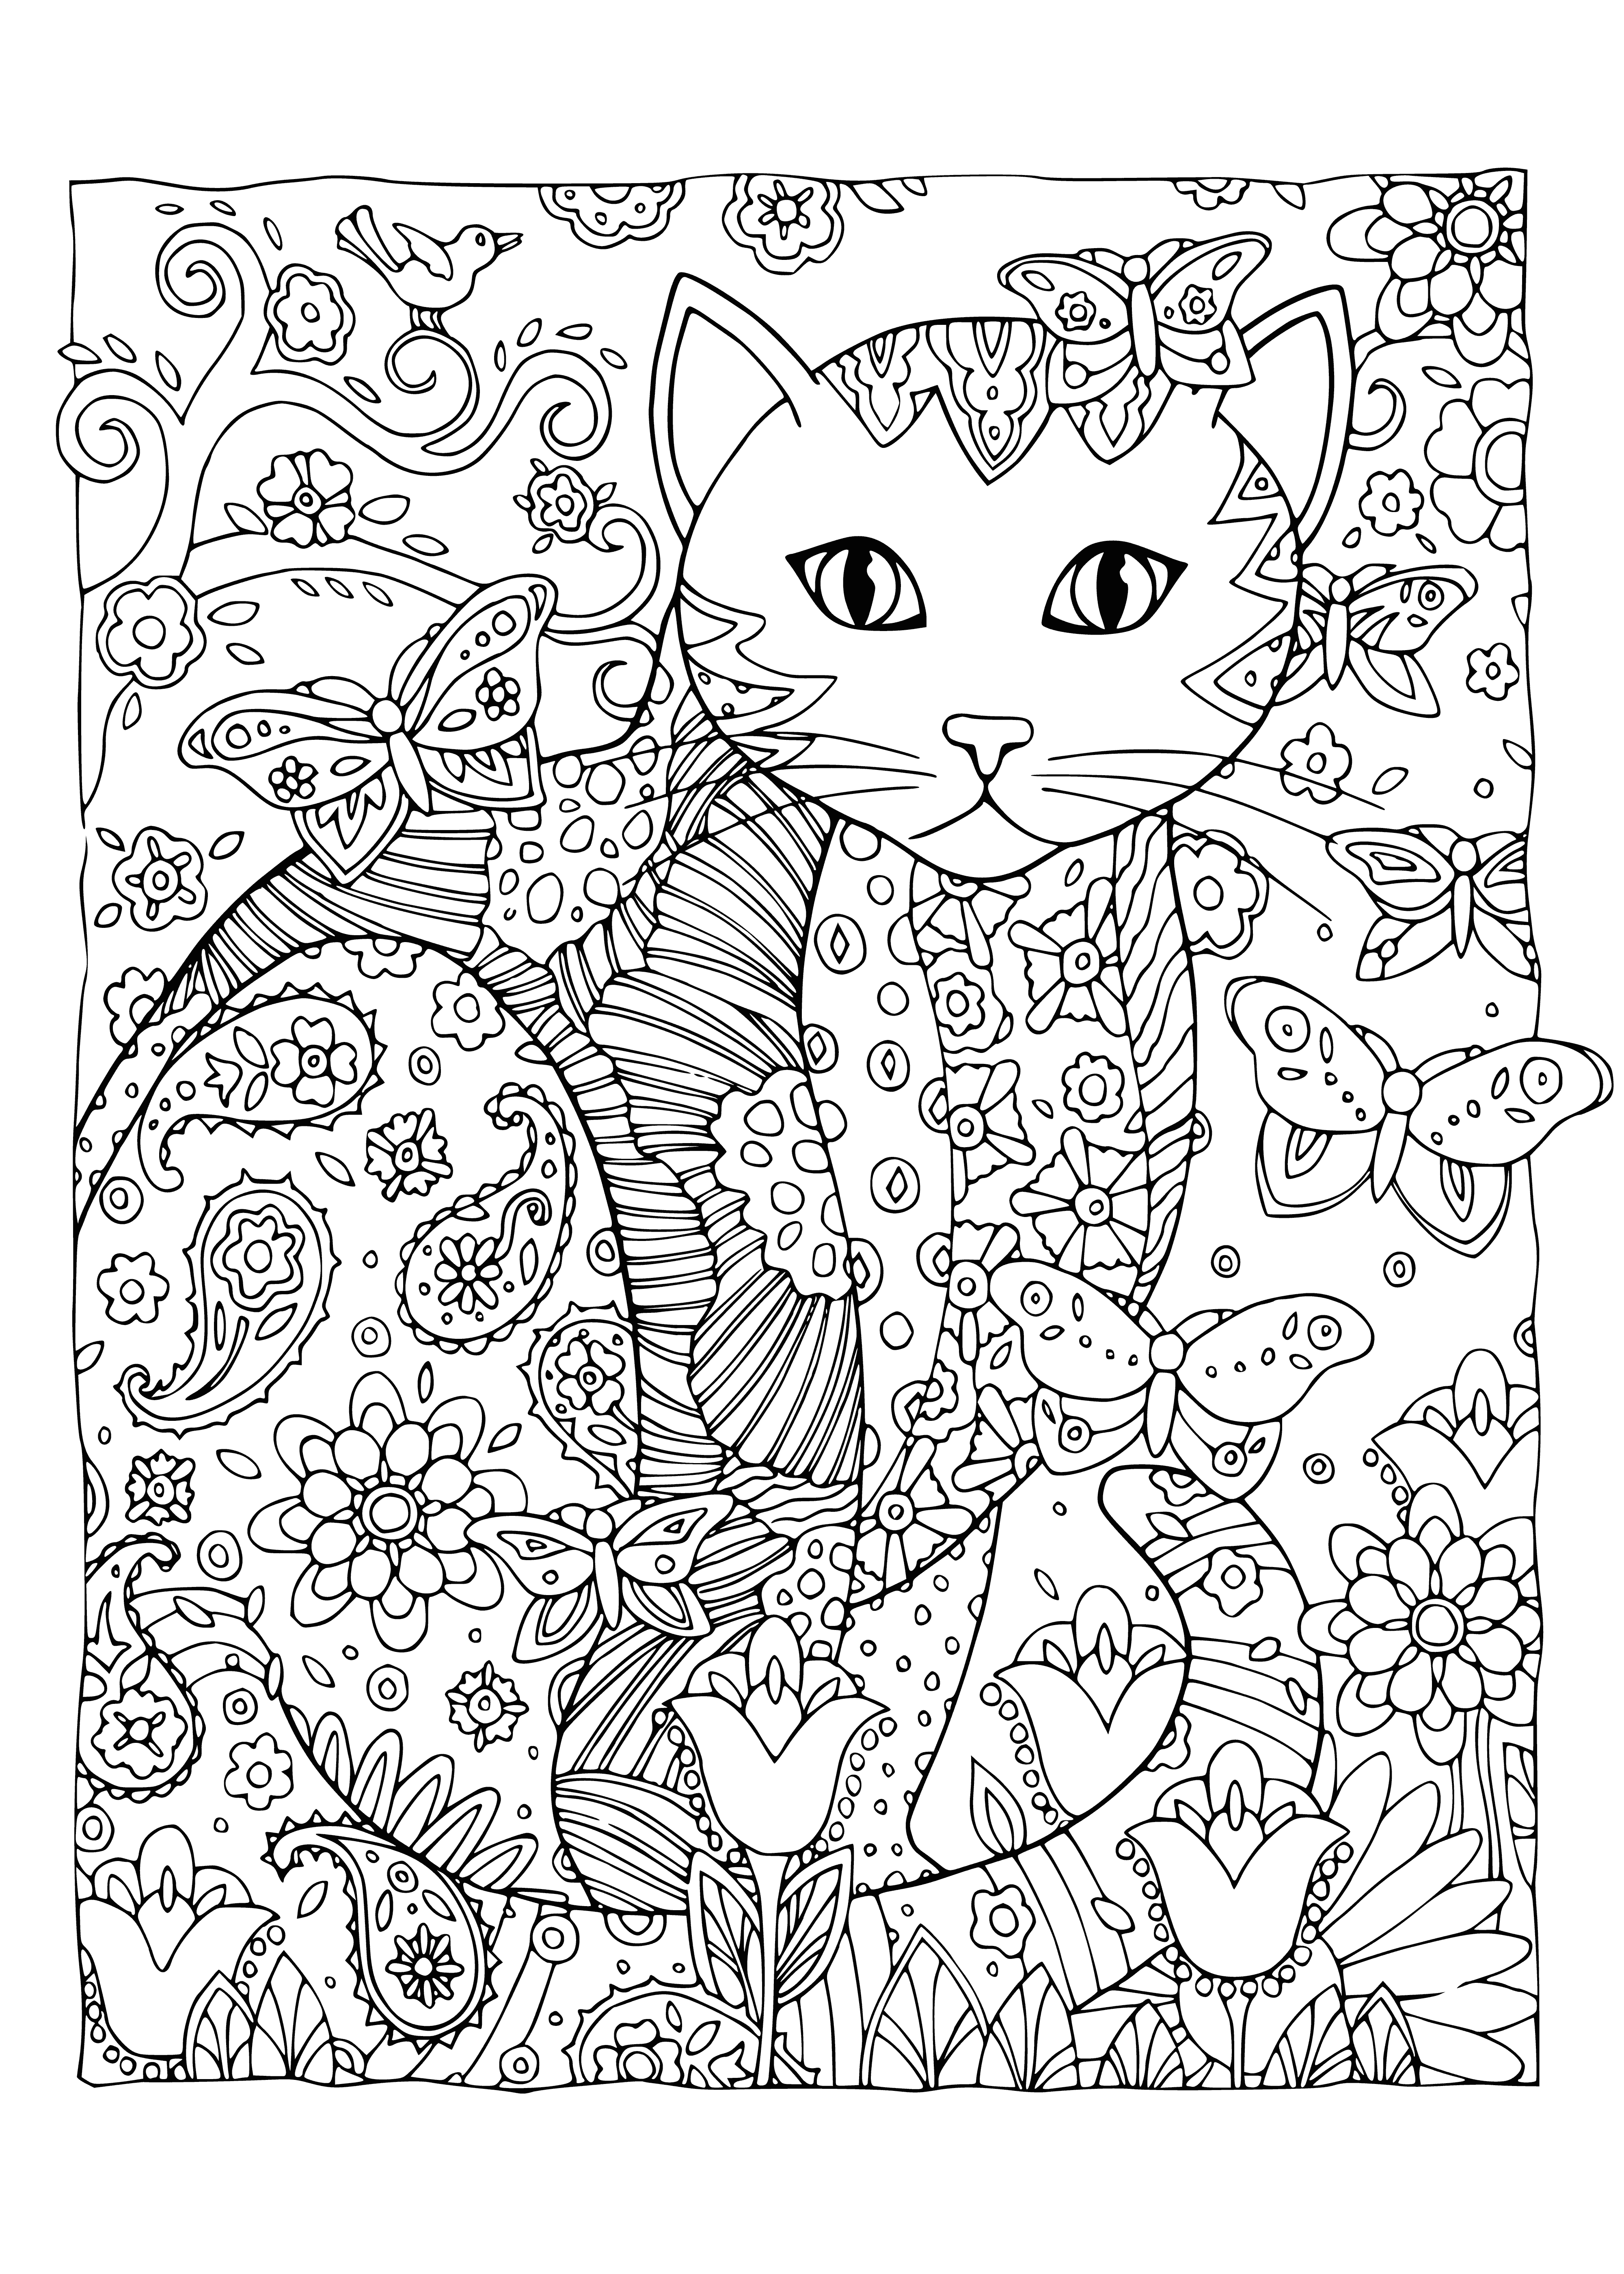 Cat and butterflies coloring page